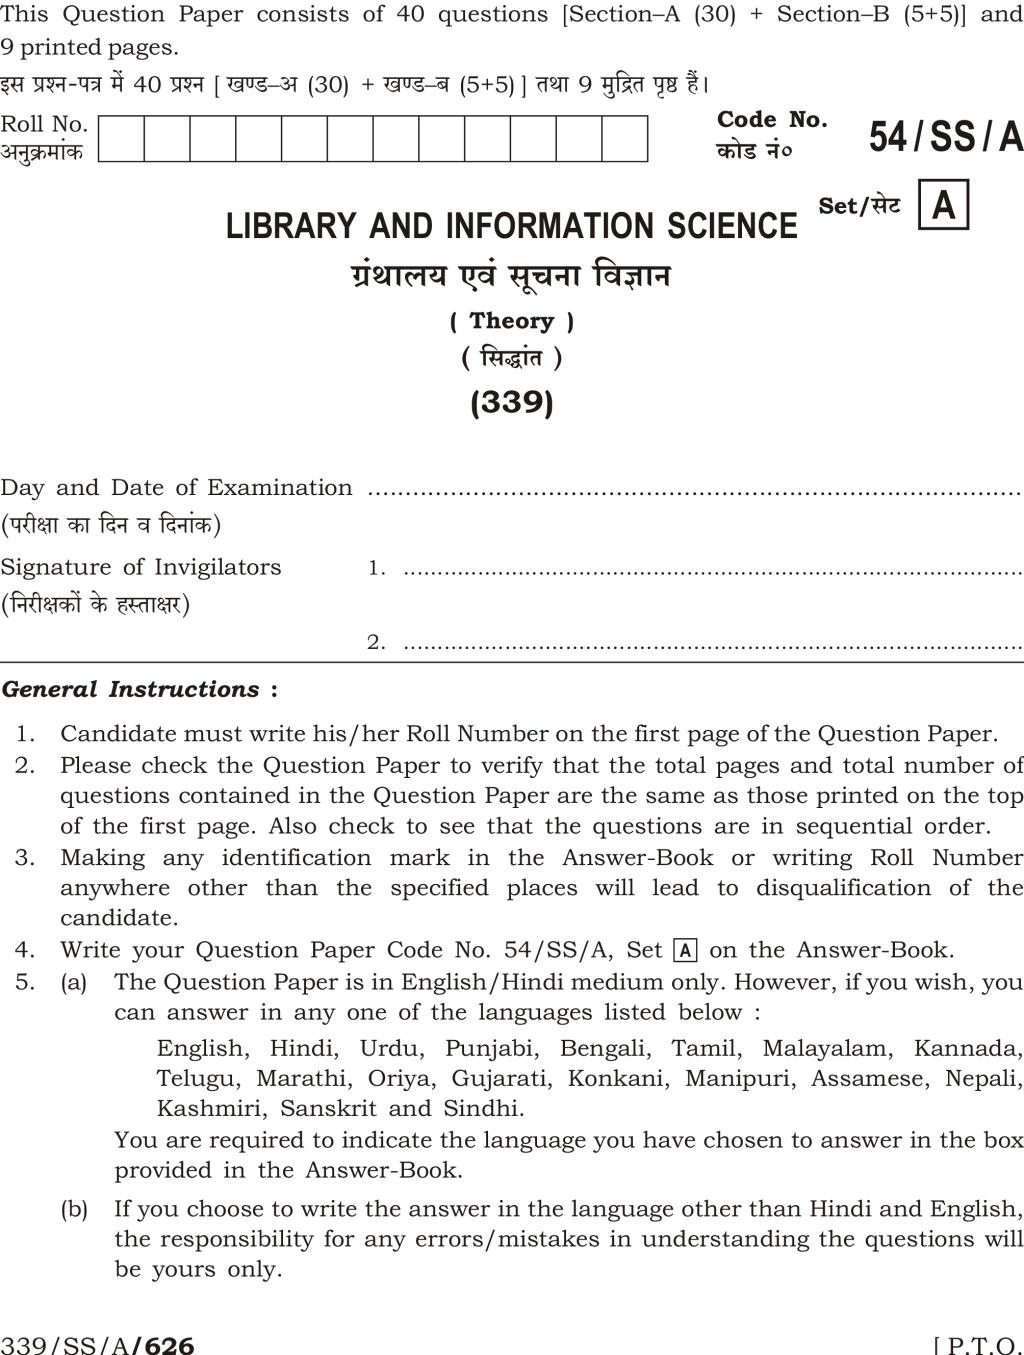 NIOS Class 12 Question Paper Apr 2017 - Library And Information Science - Page 1